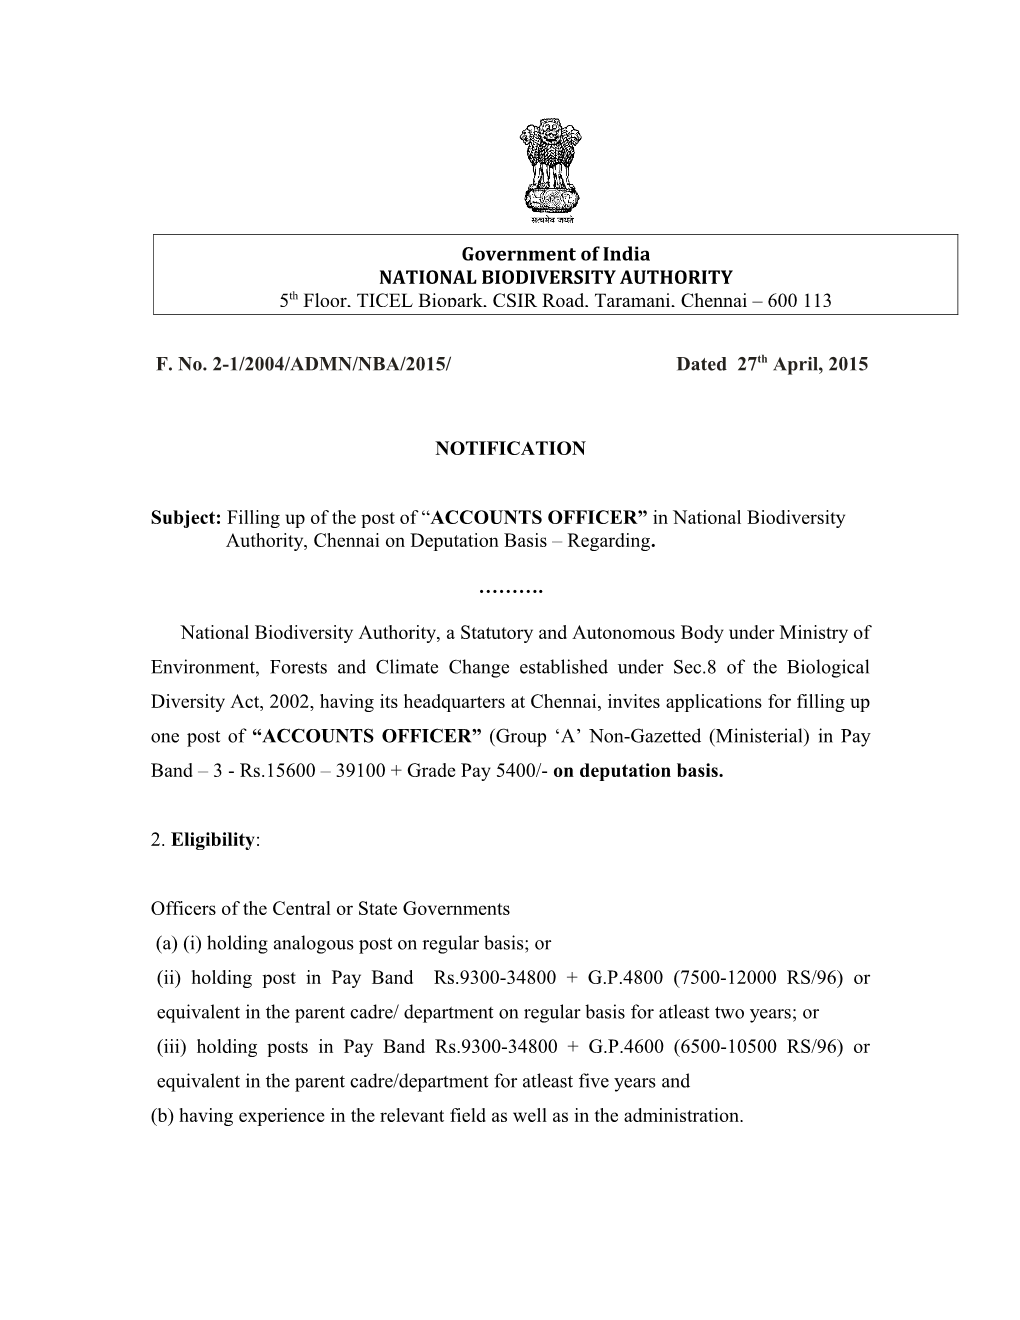 Subject: Filling up of the Post of ACCOUNTS OFFICER in Nationalbiodiversity